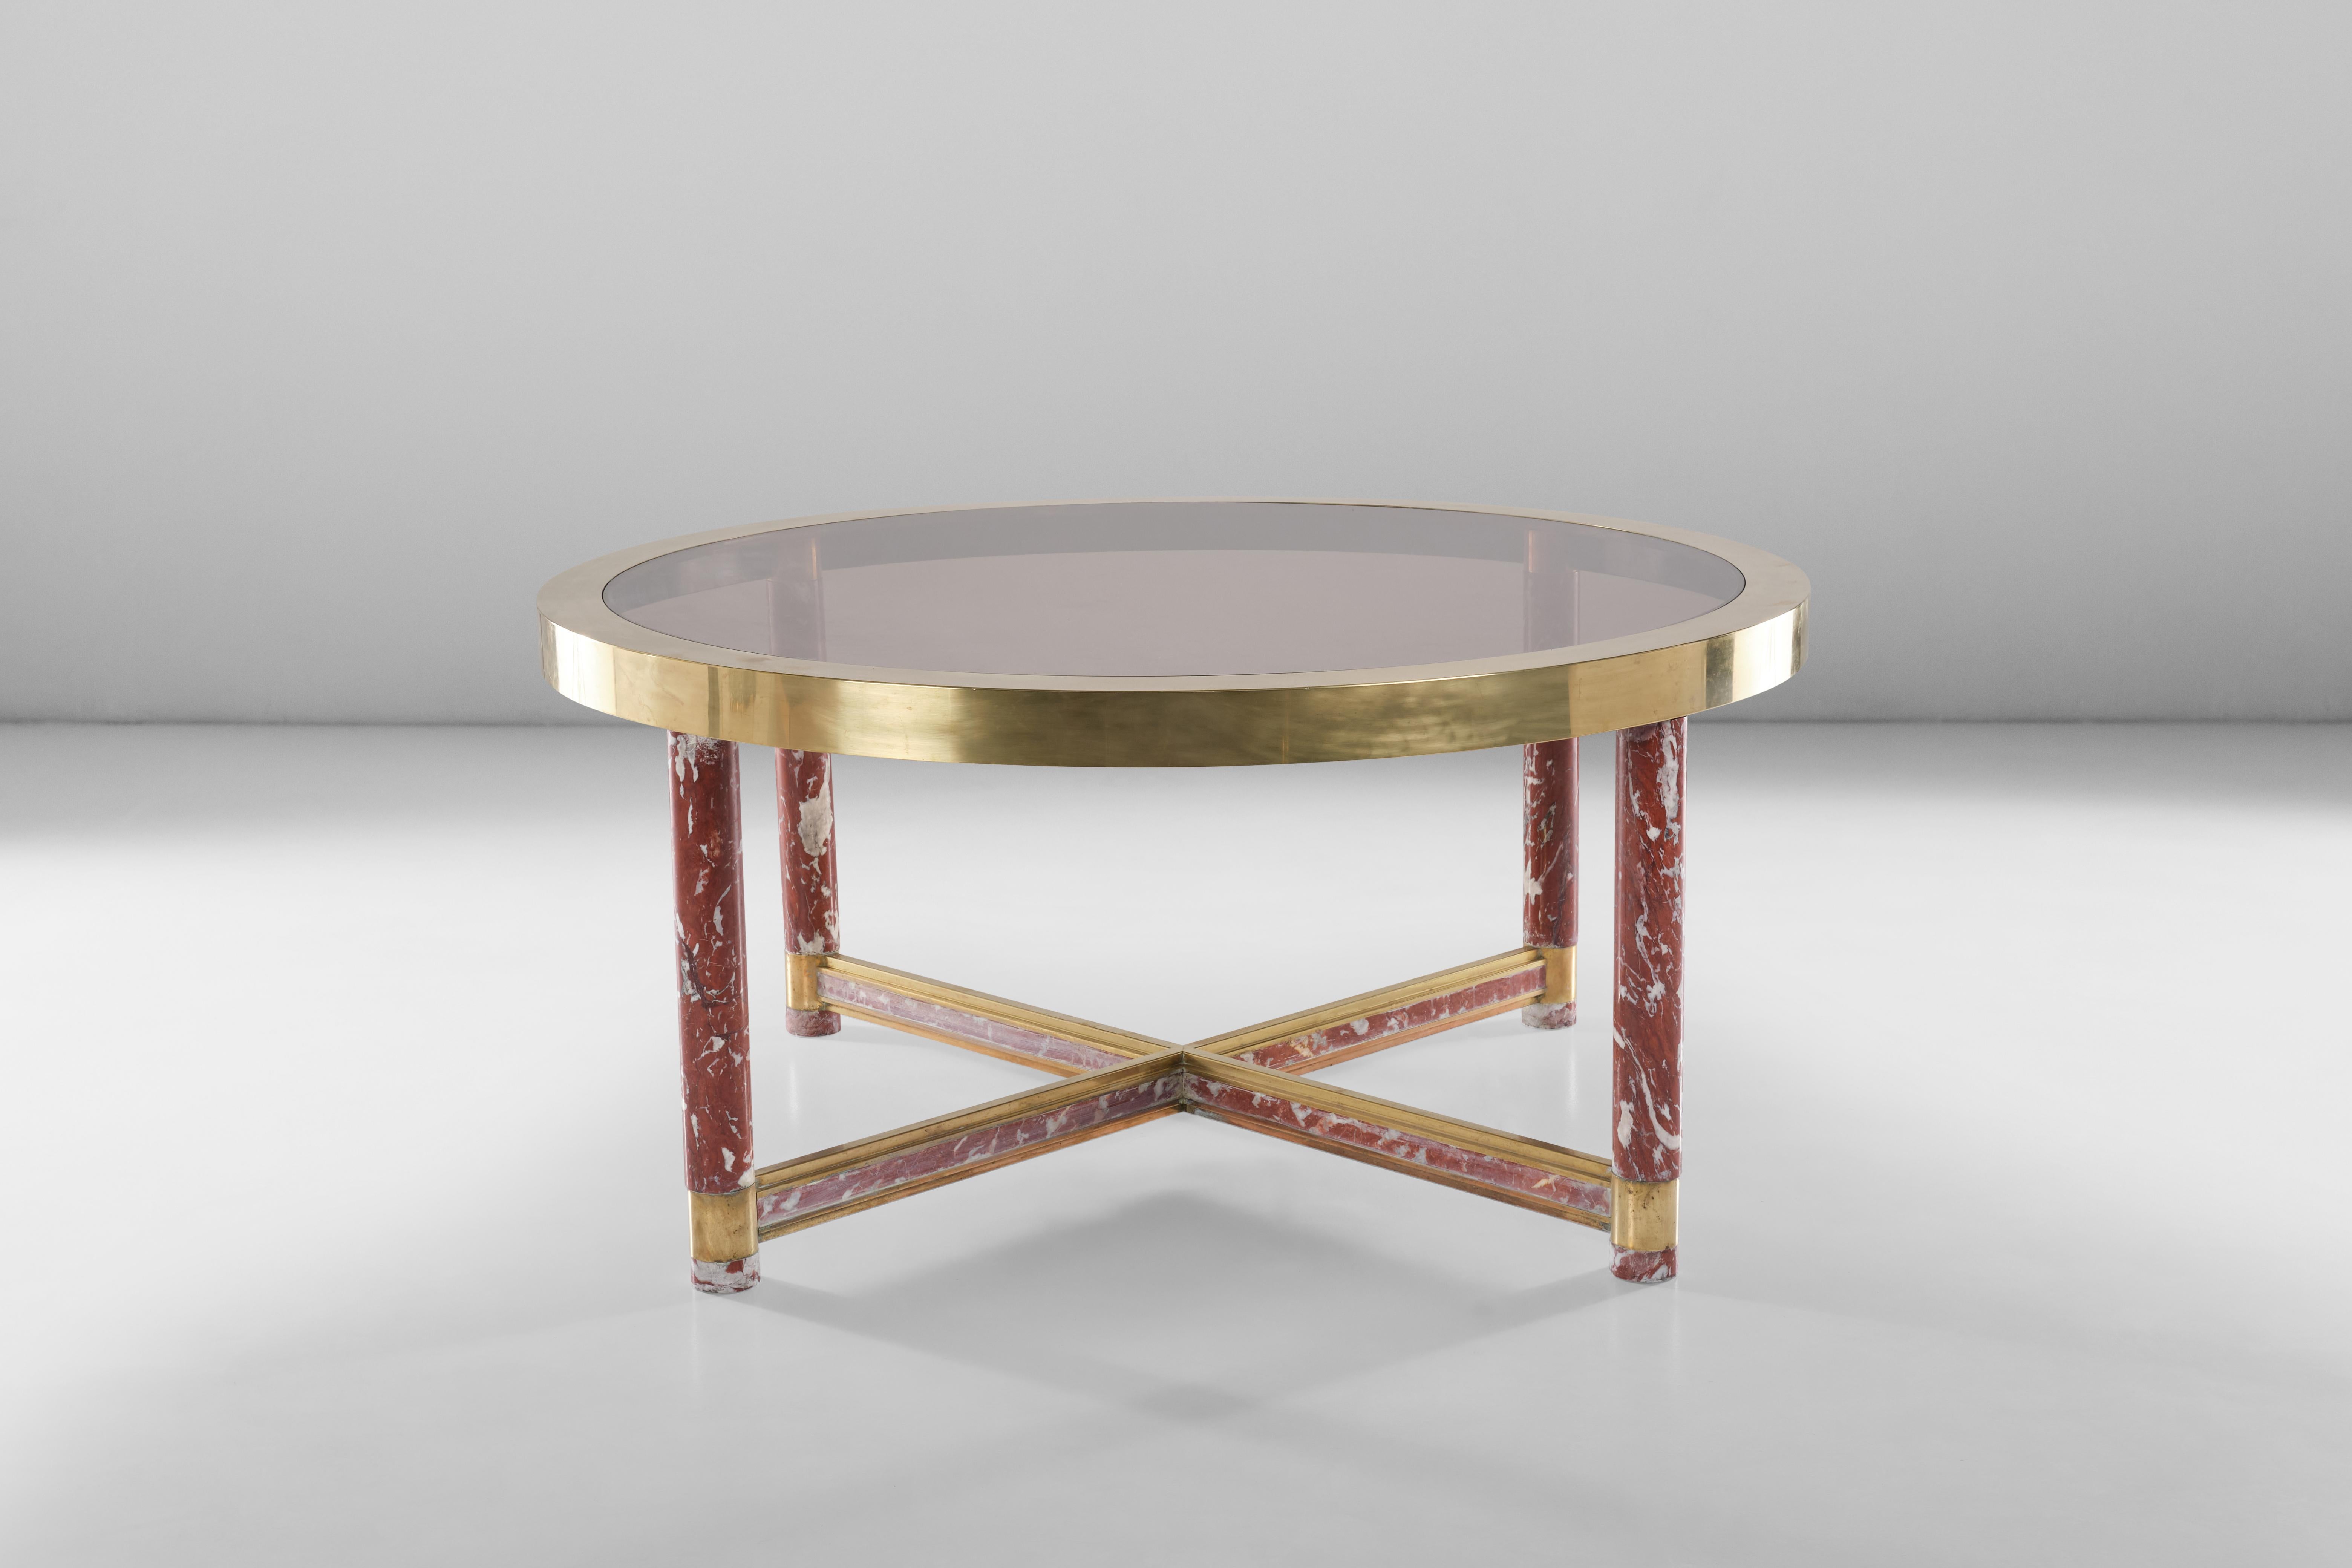 This big round table designed by Sandro Petti for Metalarte balances perfectly all its materials, from red marble to brass and glass, to convey a refined look to your room.